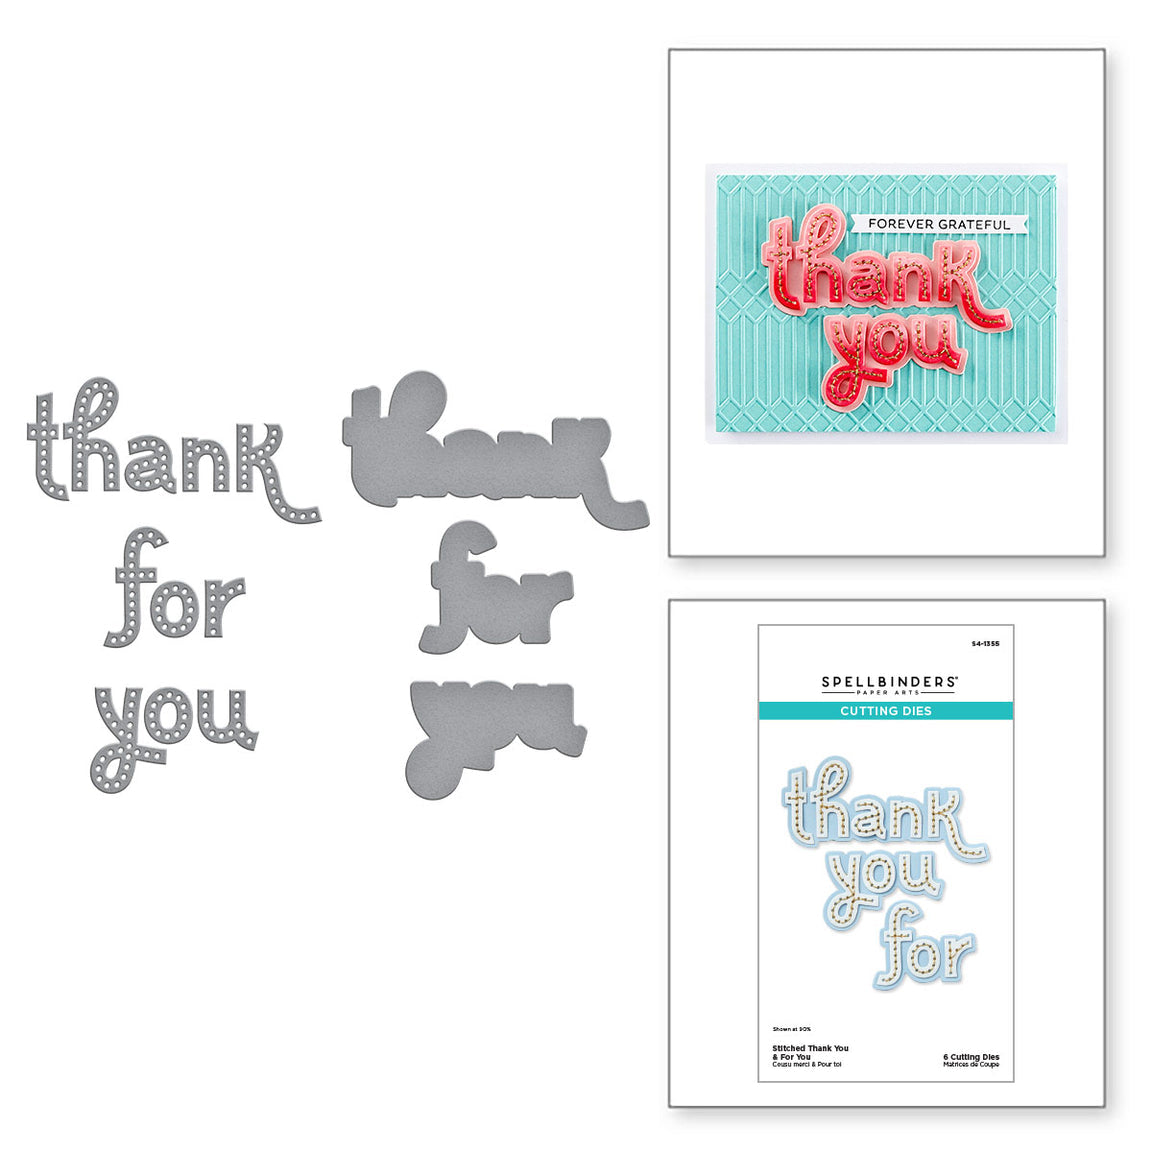 Spellbinders Stitched Thank You & For You Etched Dies - Out and About Collection